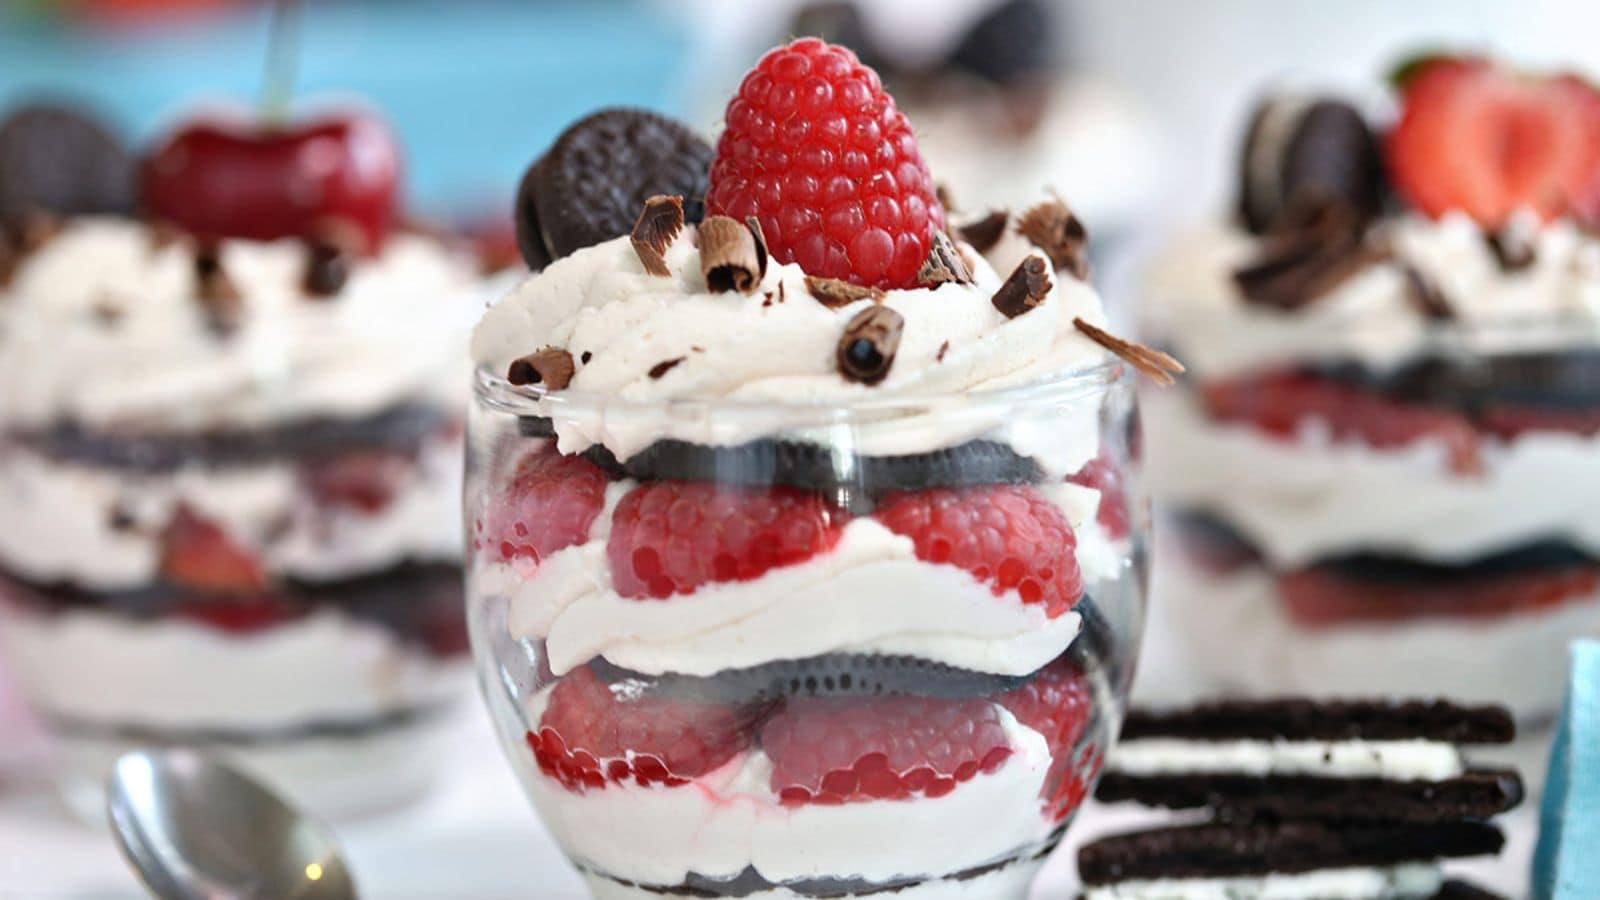 Parfait cups with Oreo cookies, whipped cream, and berries.